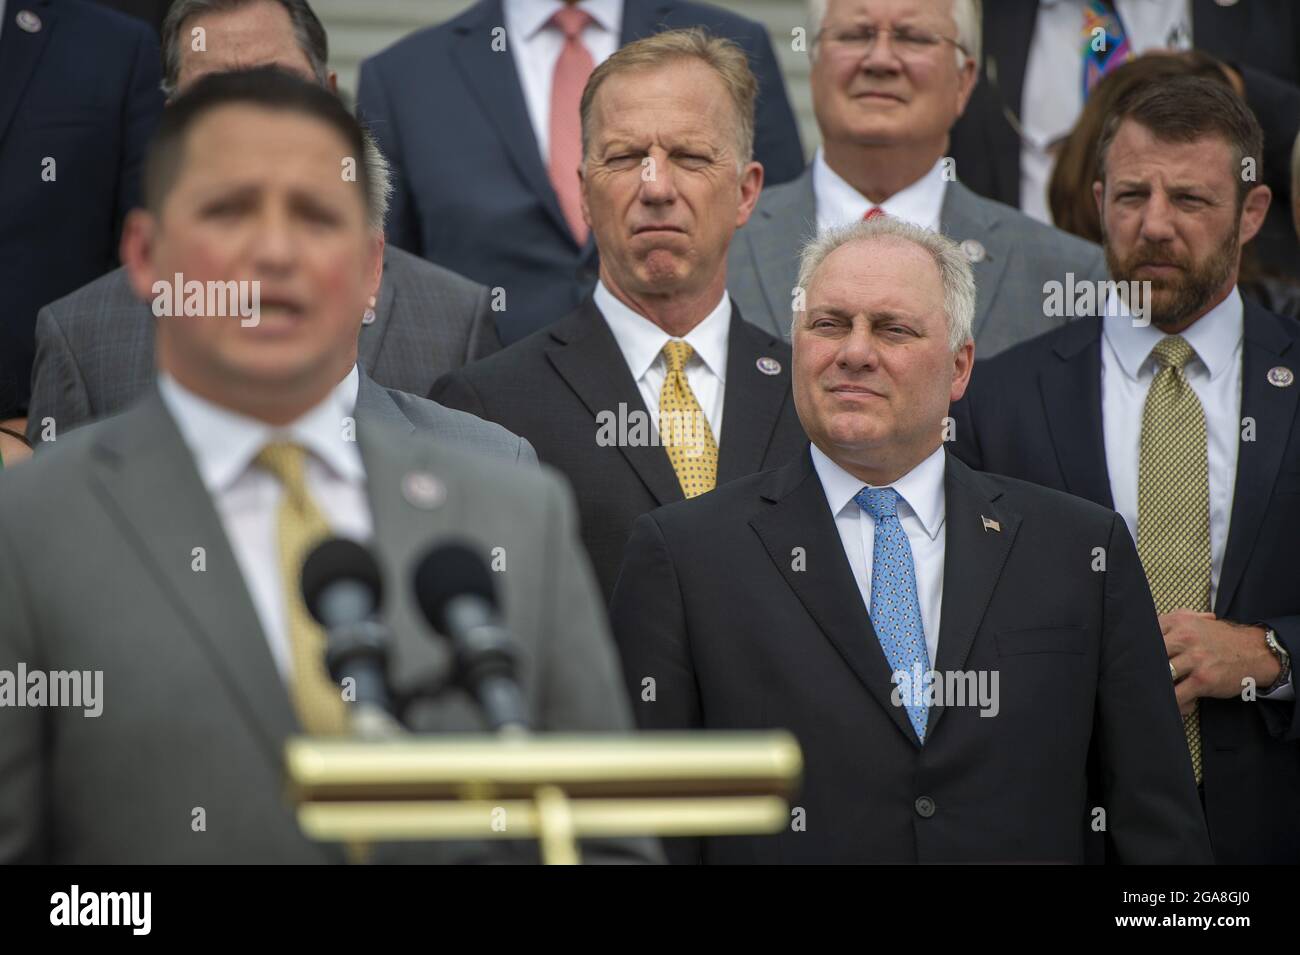 Washington, United States. 29th July, 2021. House Minority Whip Steve Scalise, R-La., R-Calif., looks on as Rep. Tony Gonzales, R-Texas, speaks during a news conference with other House Republicans to discuss President Biden and Speaker of the House Nancy Pelosi, D-Calif., before the district work period begins in August at the US Capitol in Washington, DC., on Thursday, July 29, 2021. Photo by Bonnie Cash/UPI Credit: UPI/Alamy Live News Stock Photo